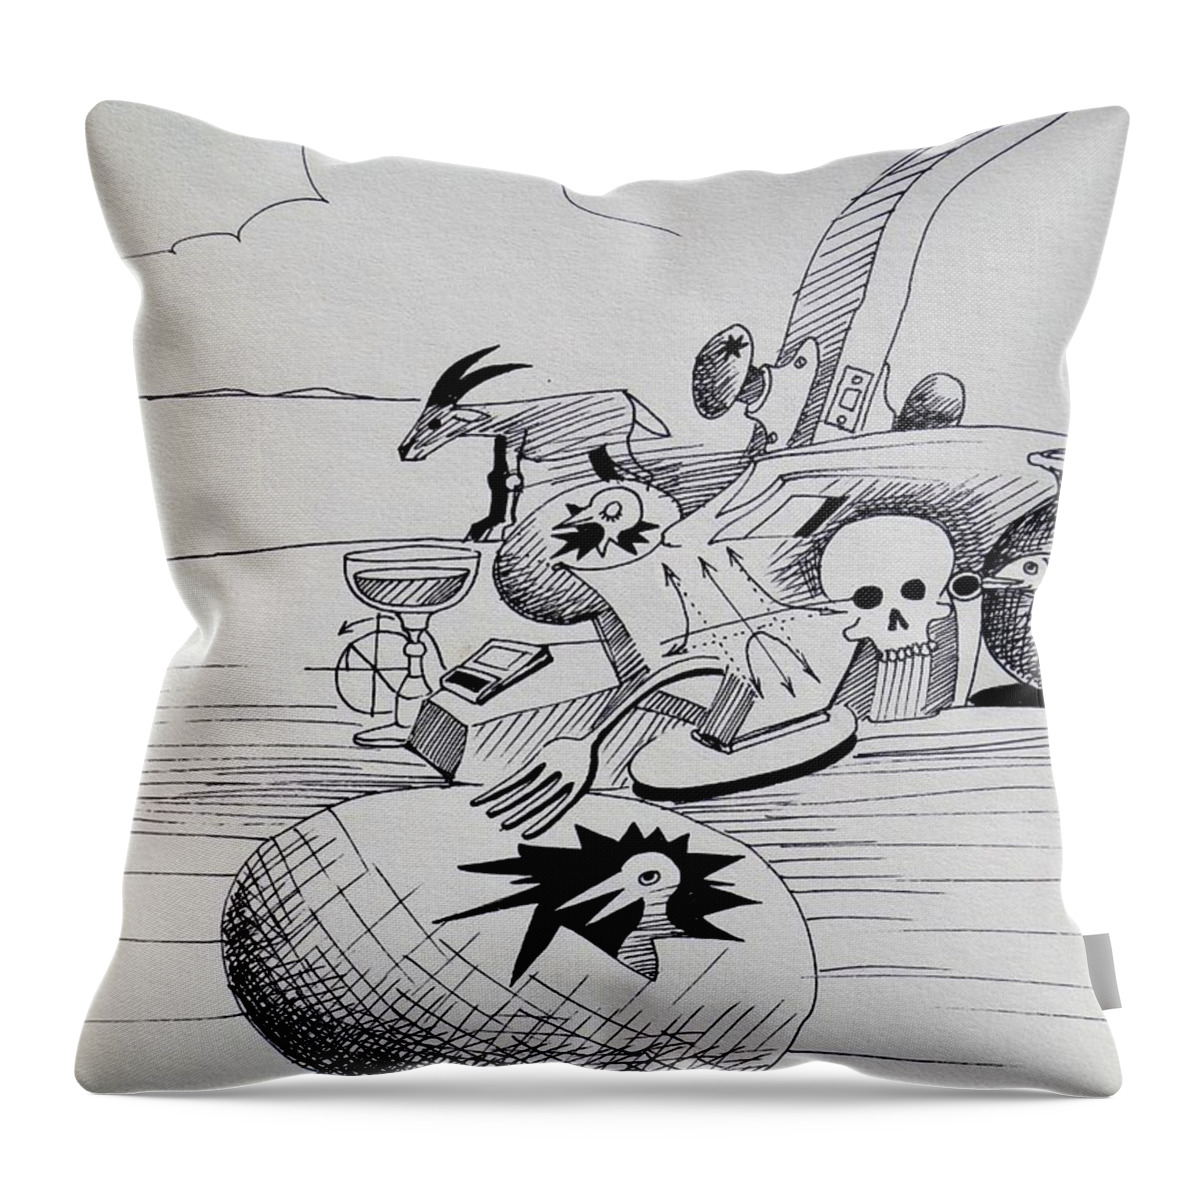 Surreal Throw Pillow featuring the drawing That's Nuts by John Kaelin